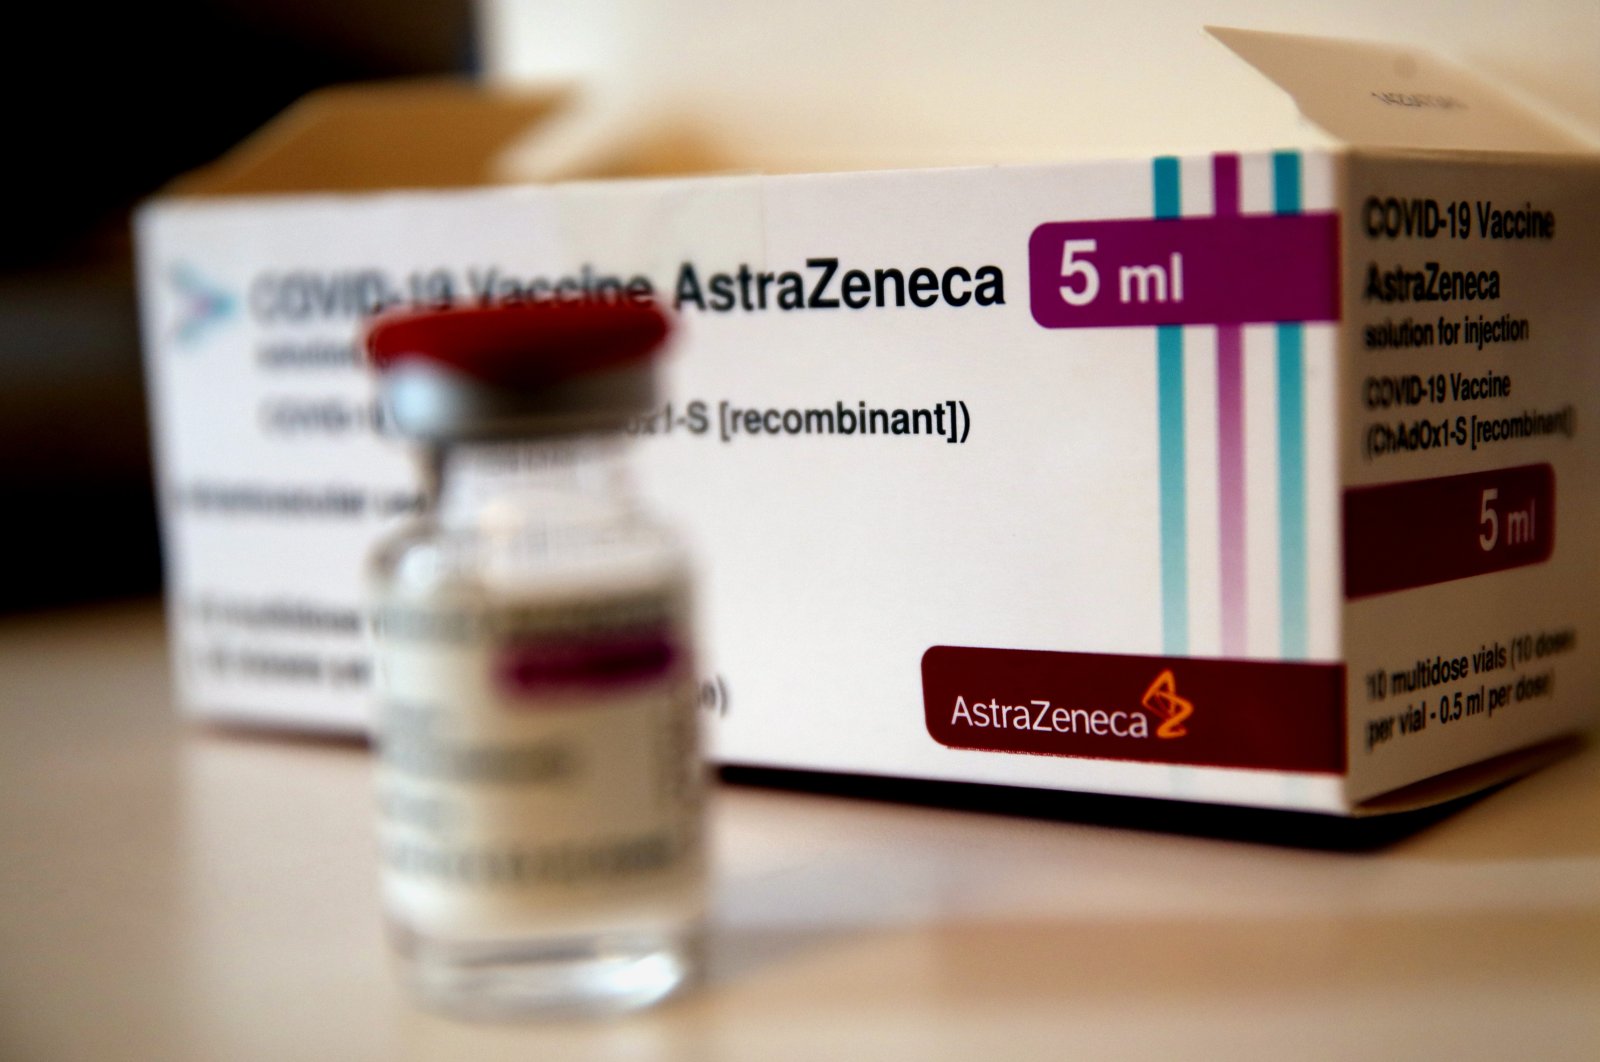 A box of AstraZeneca vaccine is pictured in a pharmacy in Boulogne Billancourt, outside Paris, Monday, March 15, 2021. (AP Photo)